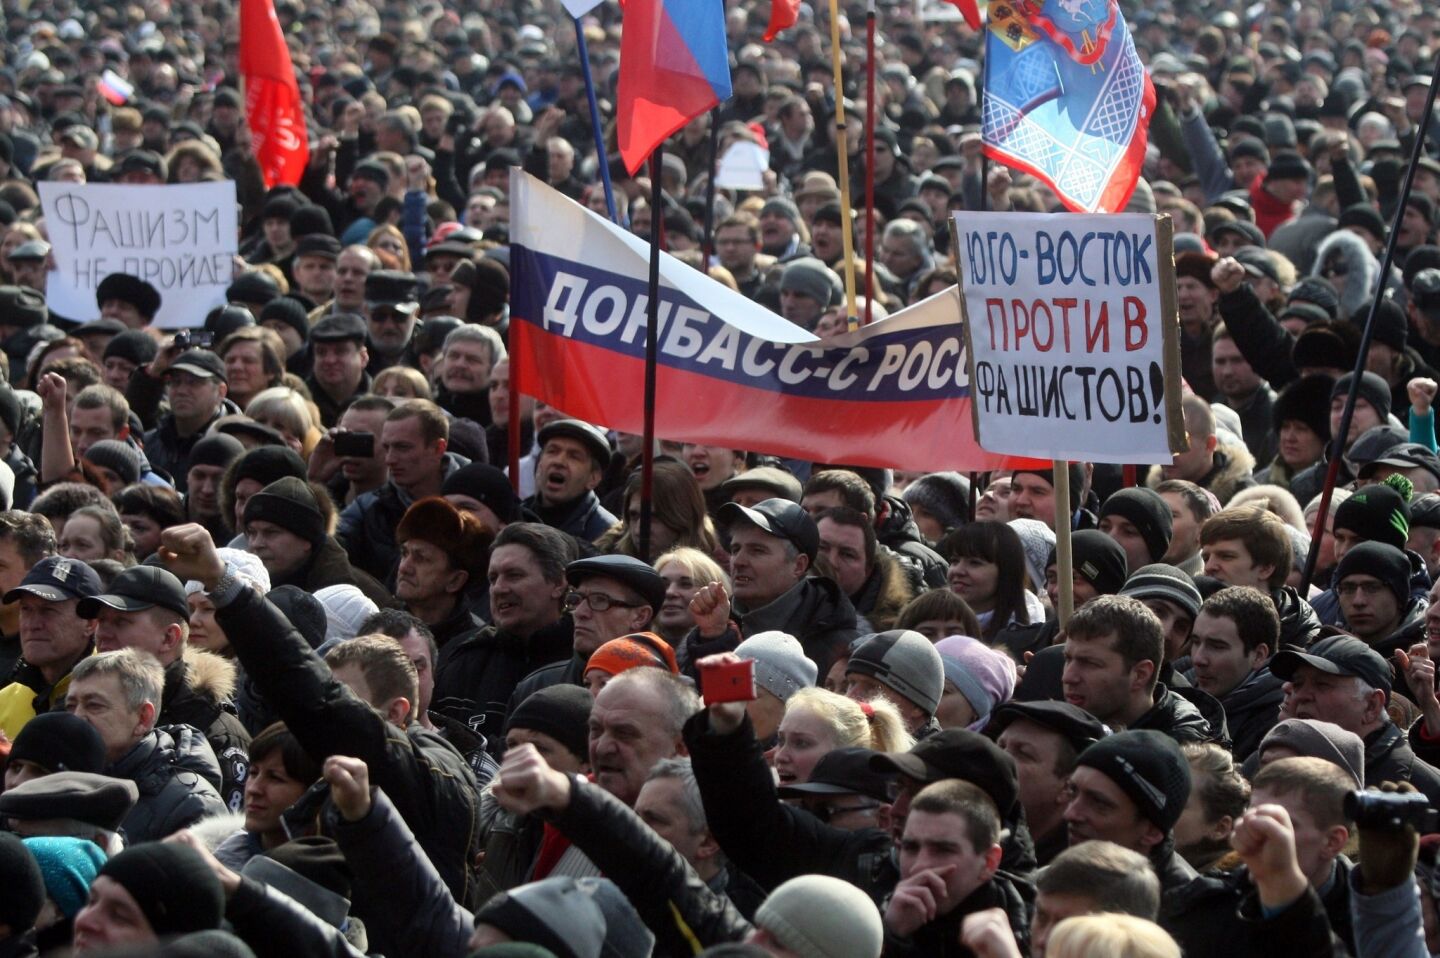 Protesters hold a banner reading "Donetsk region with Russia" and a placard reading "South-east against fascism!" during a rally in the industrial Ukrainian city of Donetsk.